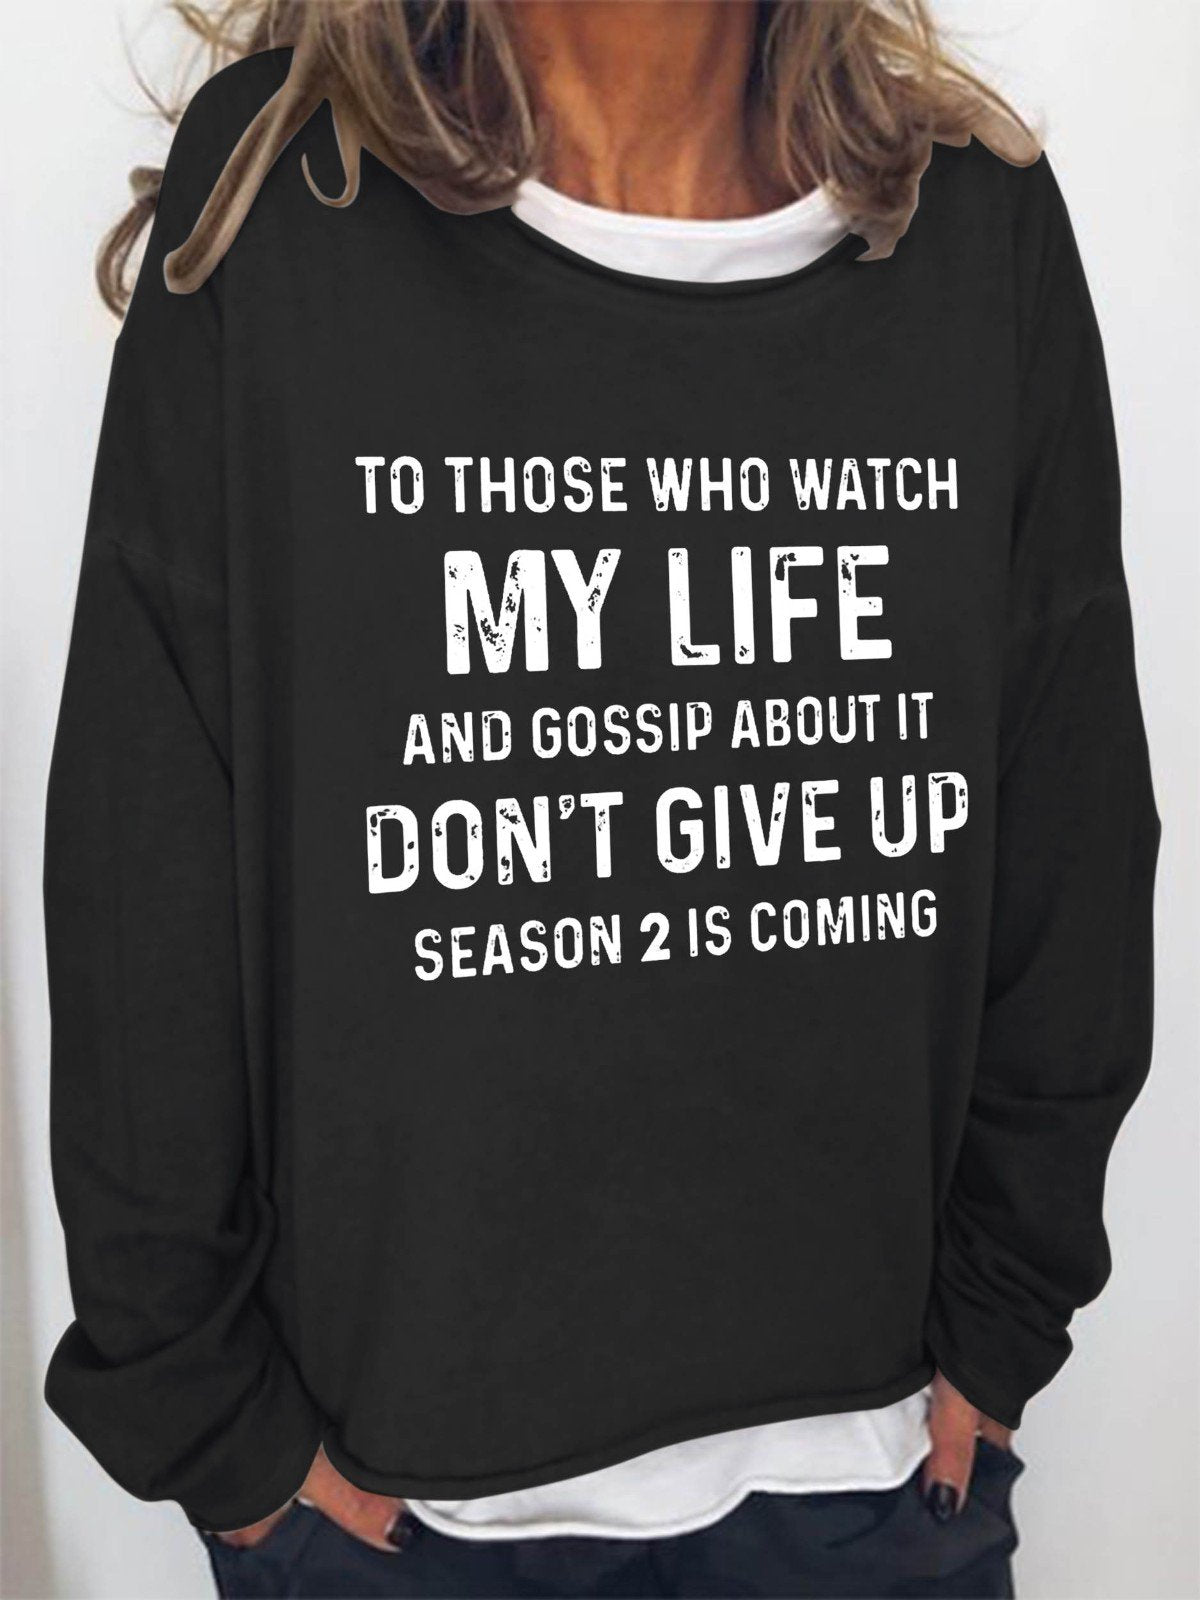 Women To Those Who Watch My Life And Gossip About It Don't Give Up Season 2 Is Coming Long Sleeve Top - Outlets Forever